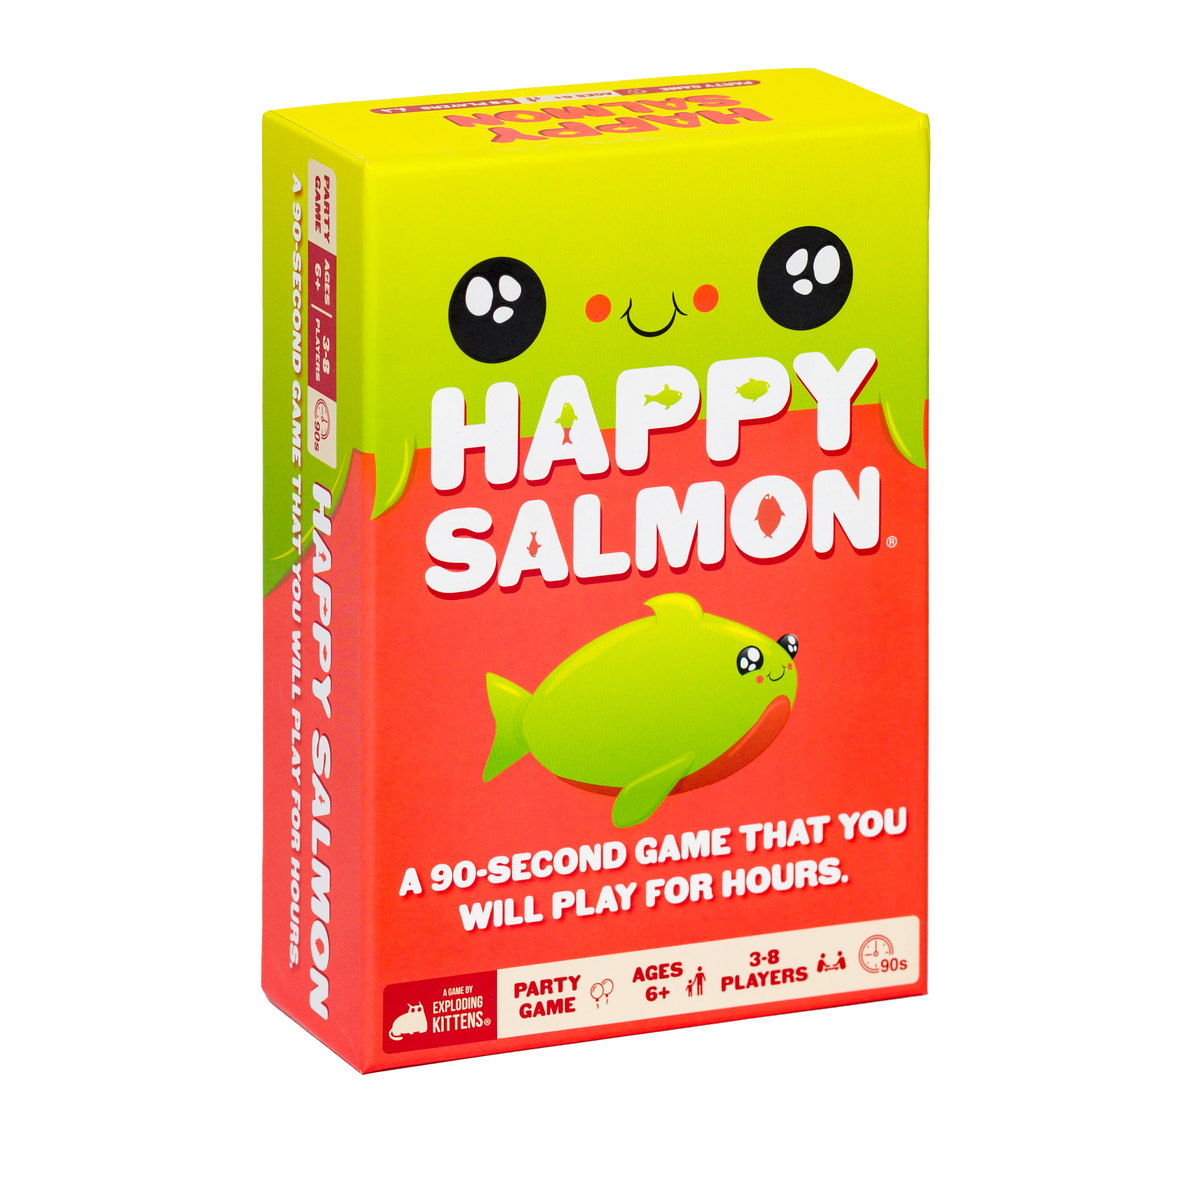 How To Play - HAPPY SALMON 